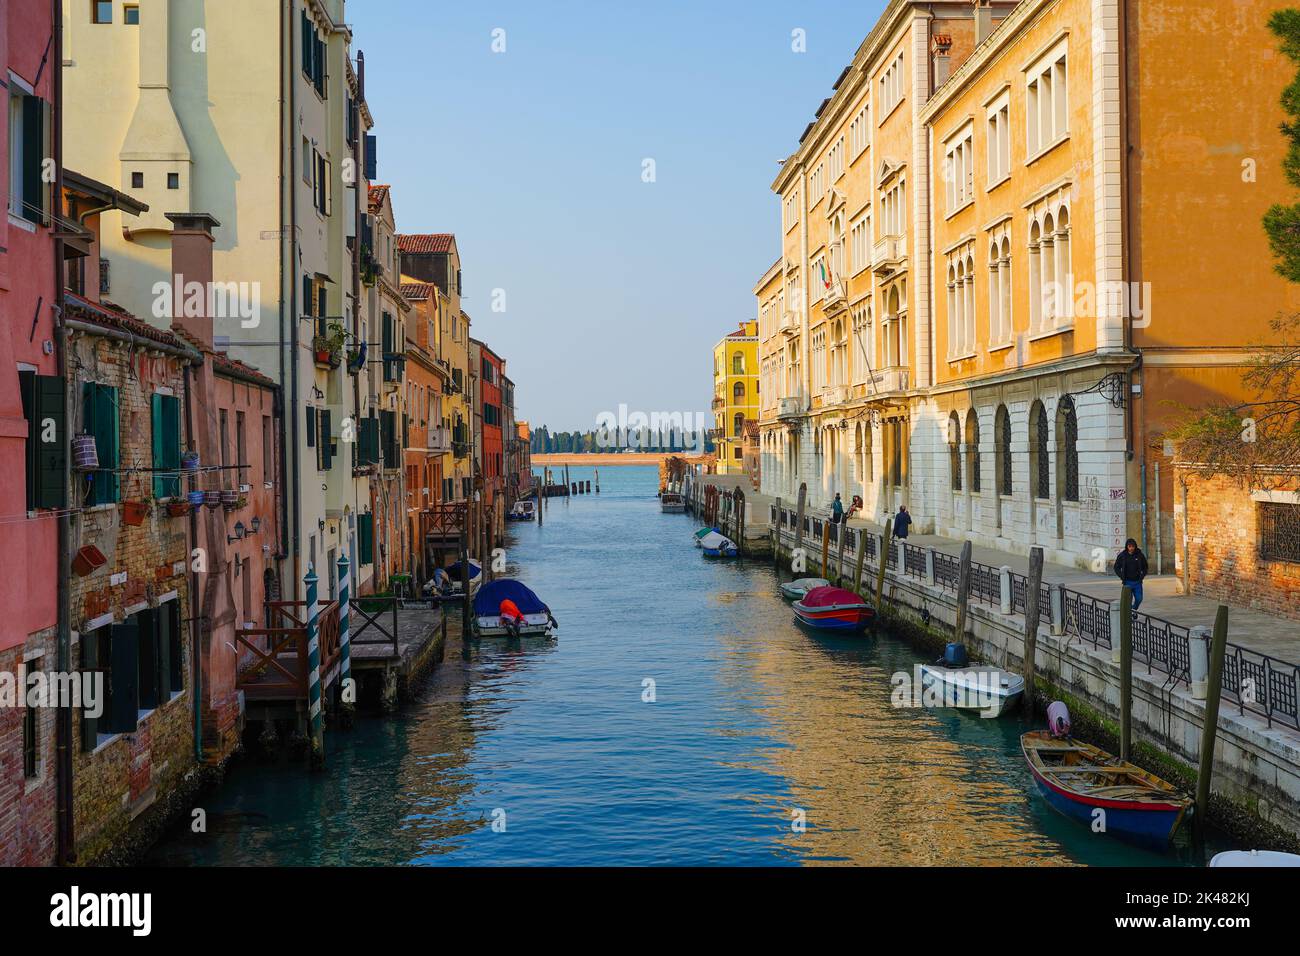 A traditional canal in Italy with moored boats Stock Photo